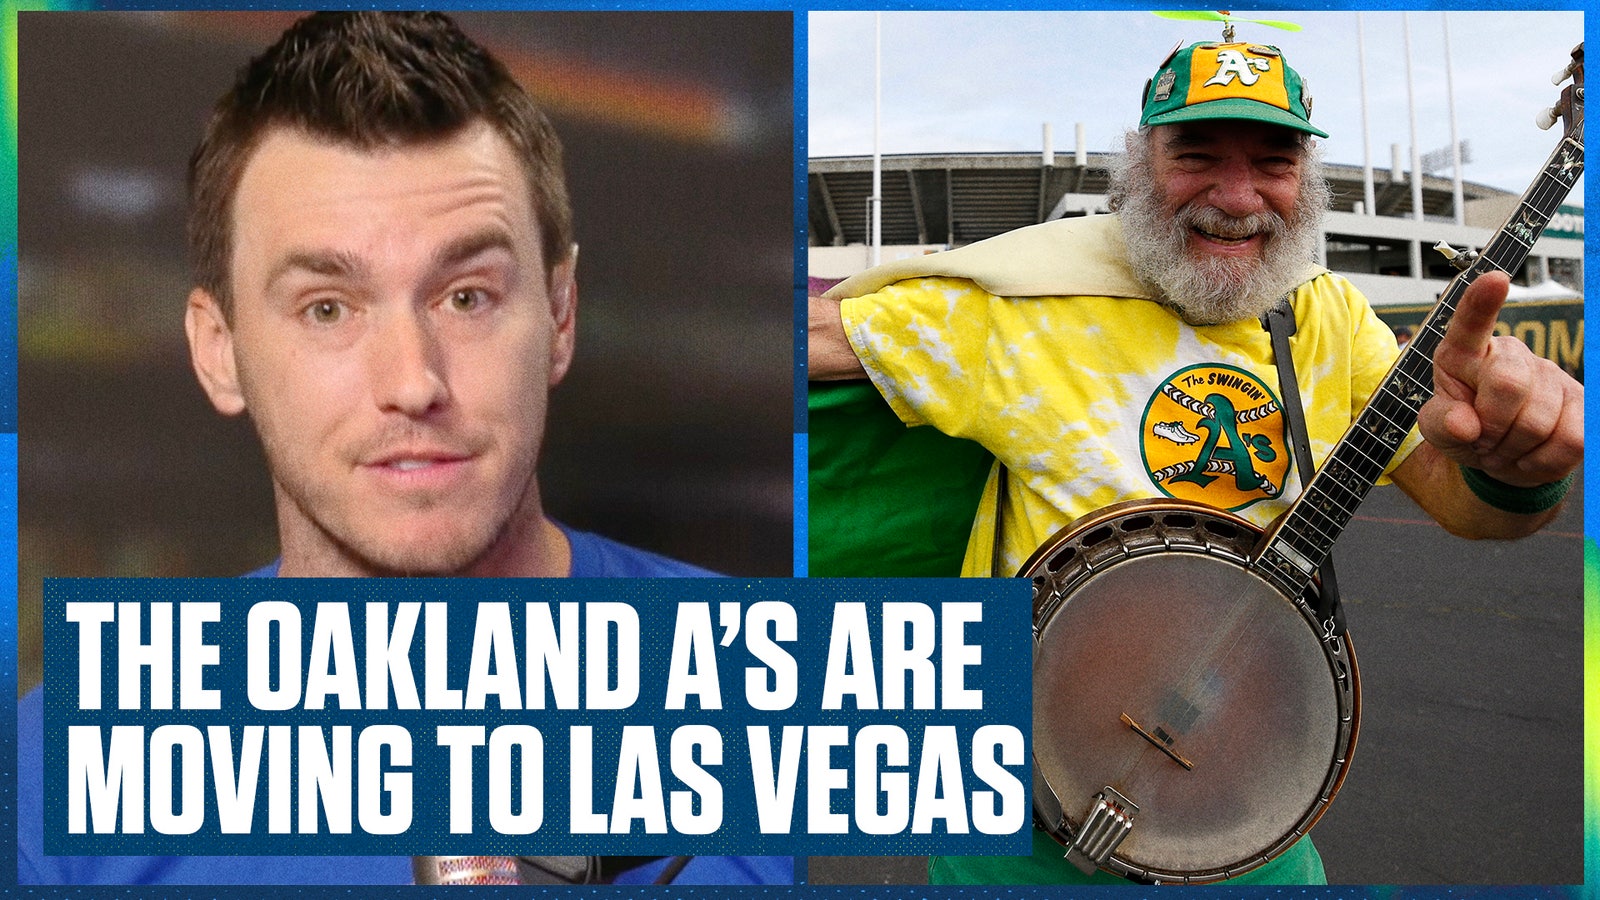 In April, Ben Verlander and Alex Curry discussed the news that the A's had bought land in Las Vegas and plan to build a new stadium to move the franchise. Ben and Alex talk about what this means for MLB and A's fans.